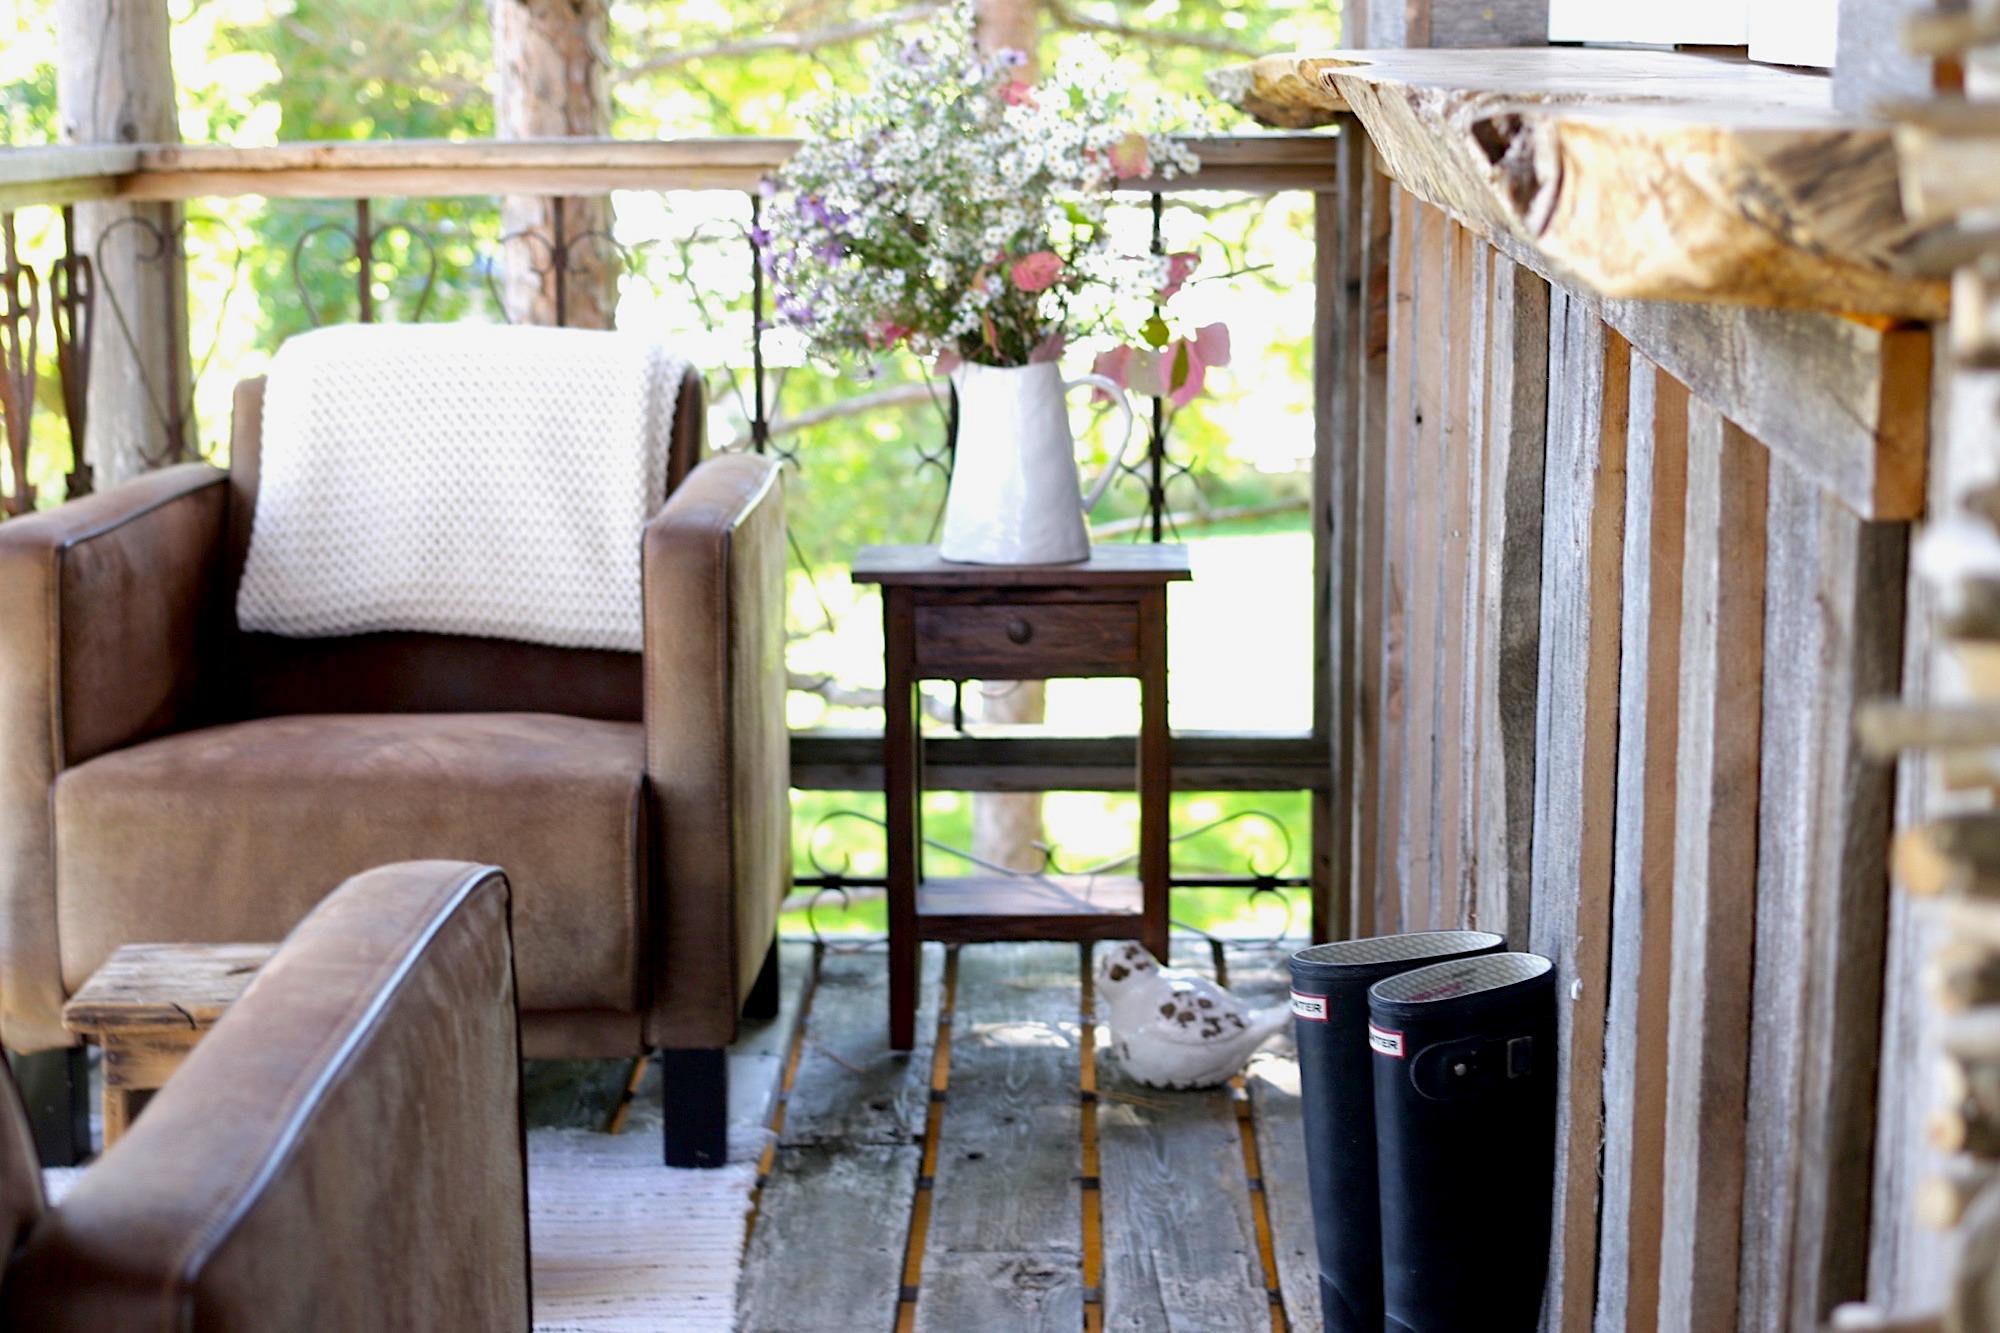 BEFORE photos of the #treehouse | DESIGN THE LIFE YOU WANT TO LIVE | Lynne Knowlton